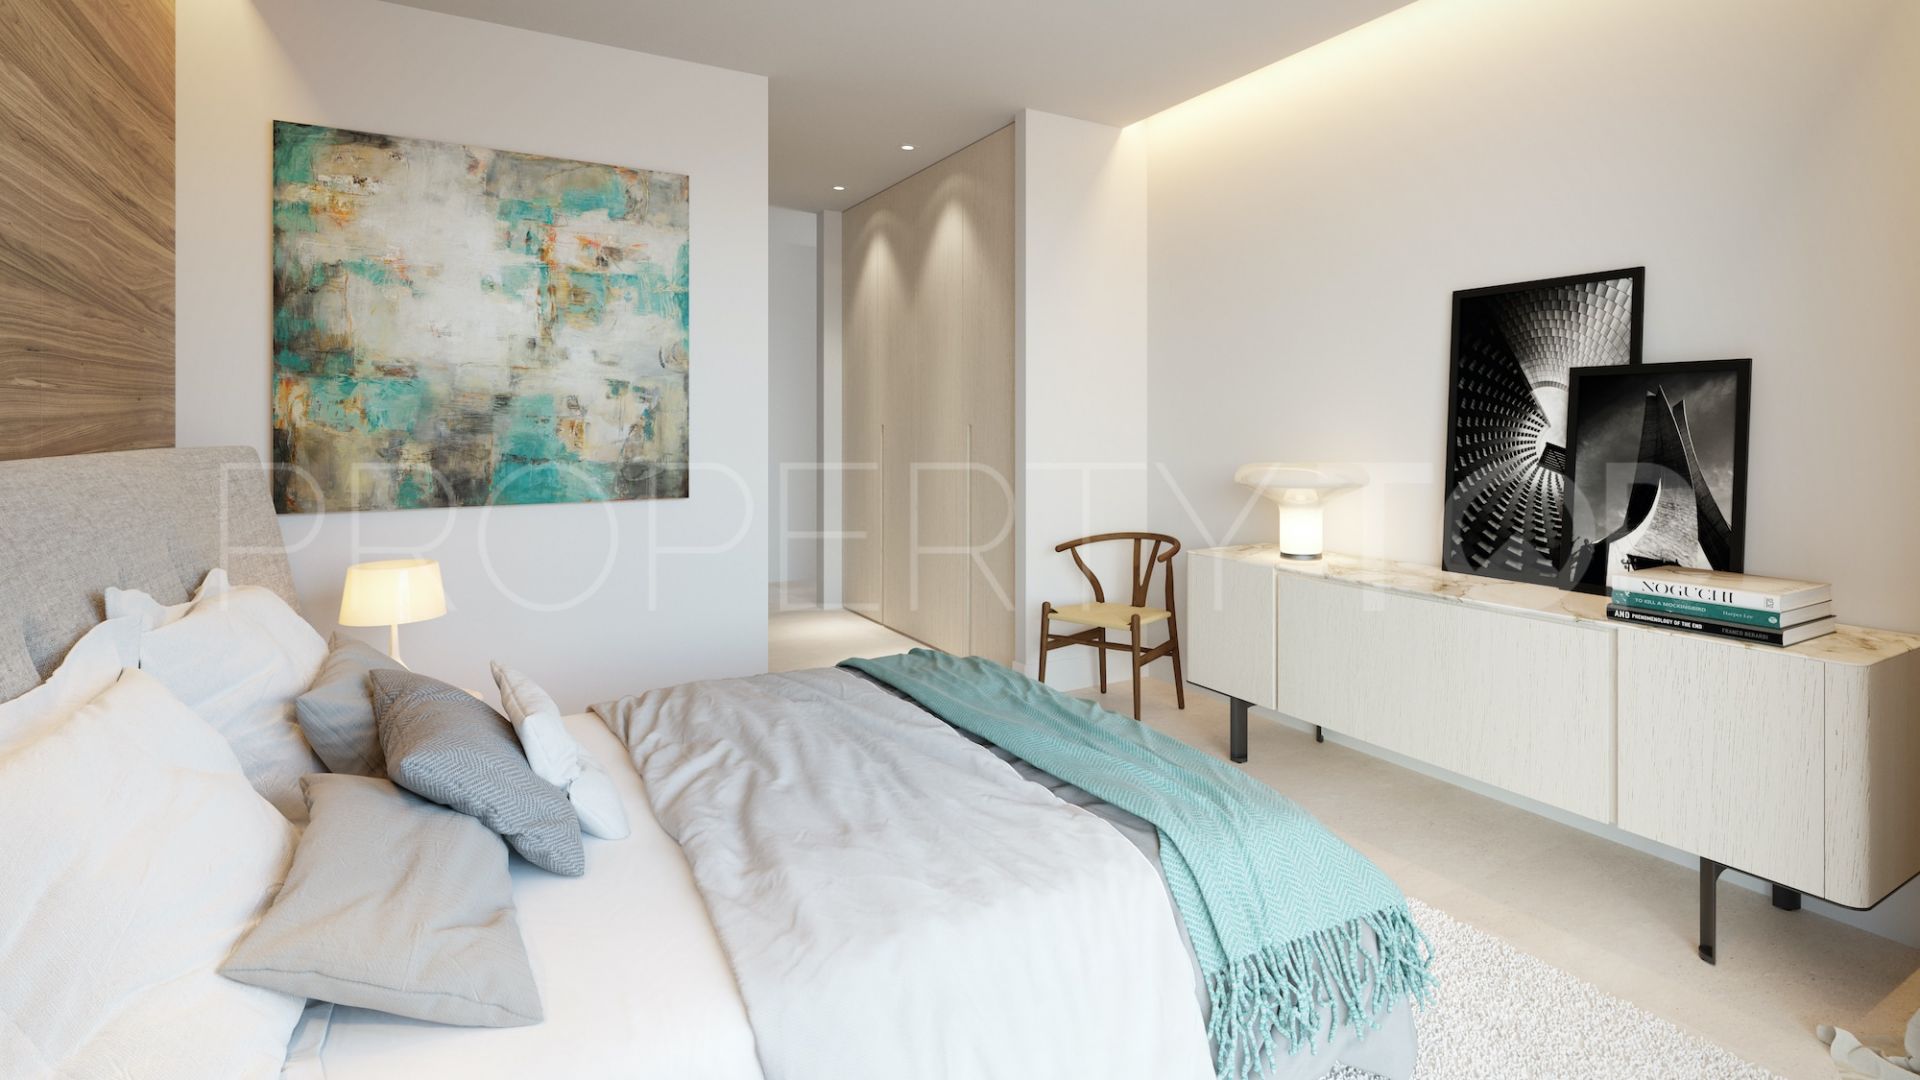 For sale apartment in Benahavis with 3 bedrooms